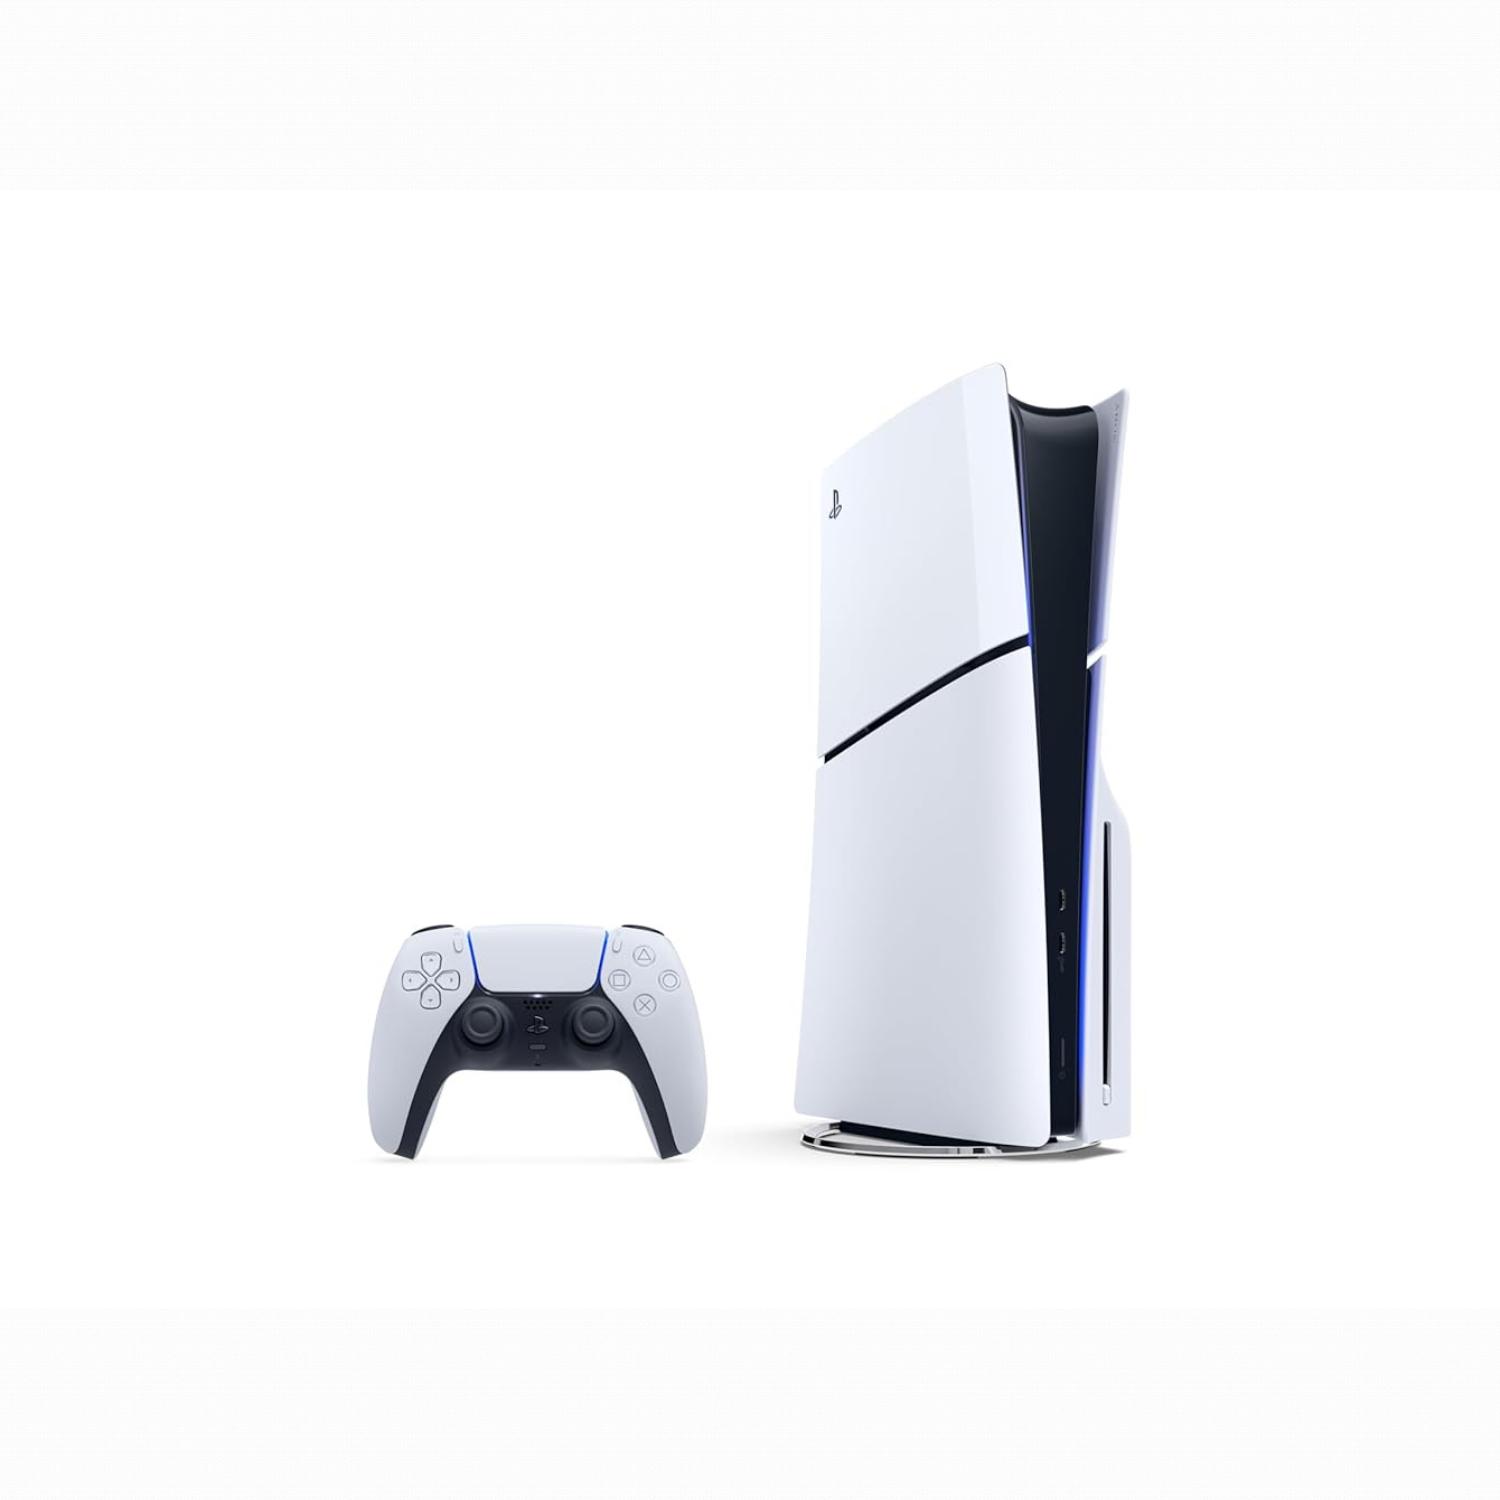 Sony - PlayStation 5 Slim Console | Disc Edition | White